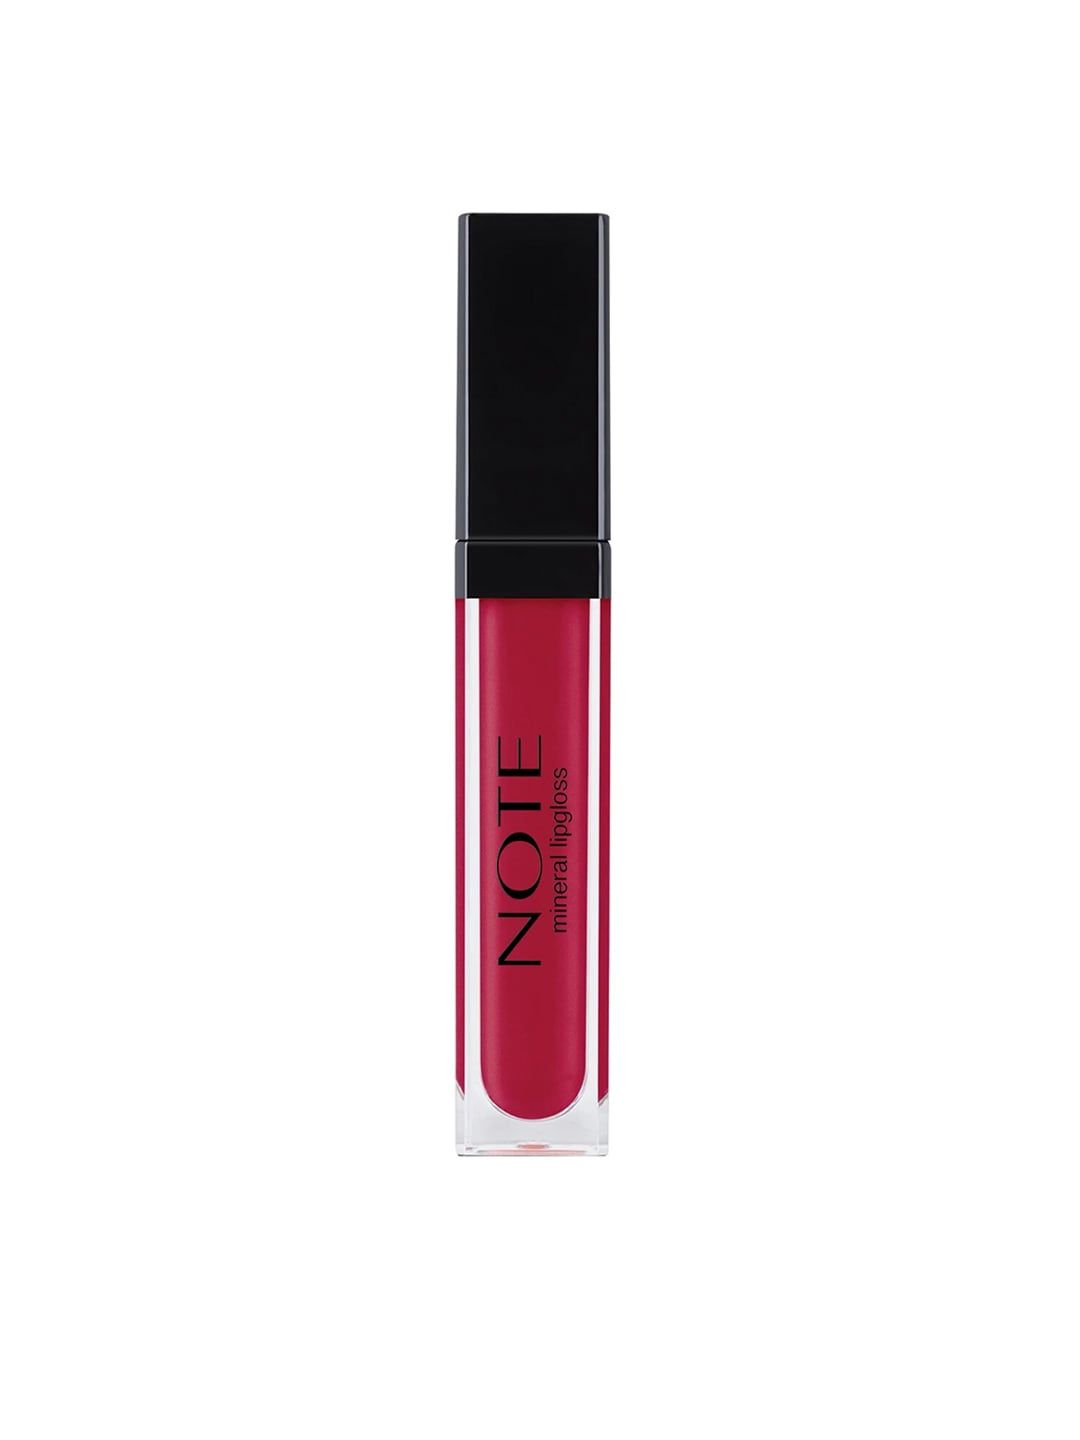 Note Women Mineral Lip Gloss - 03 Nude Rose Price in India